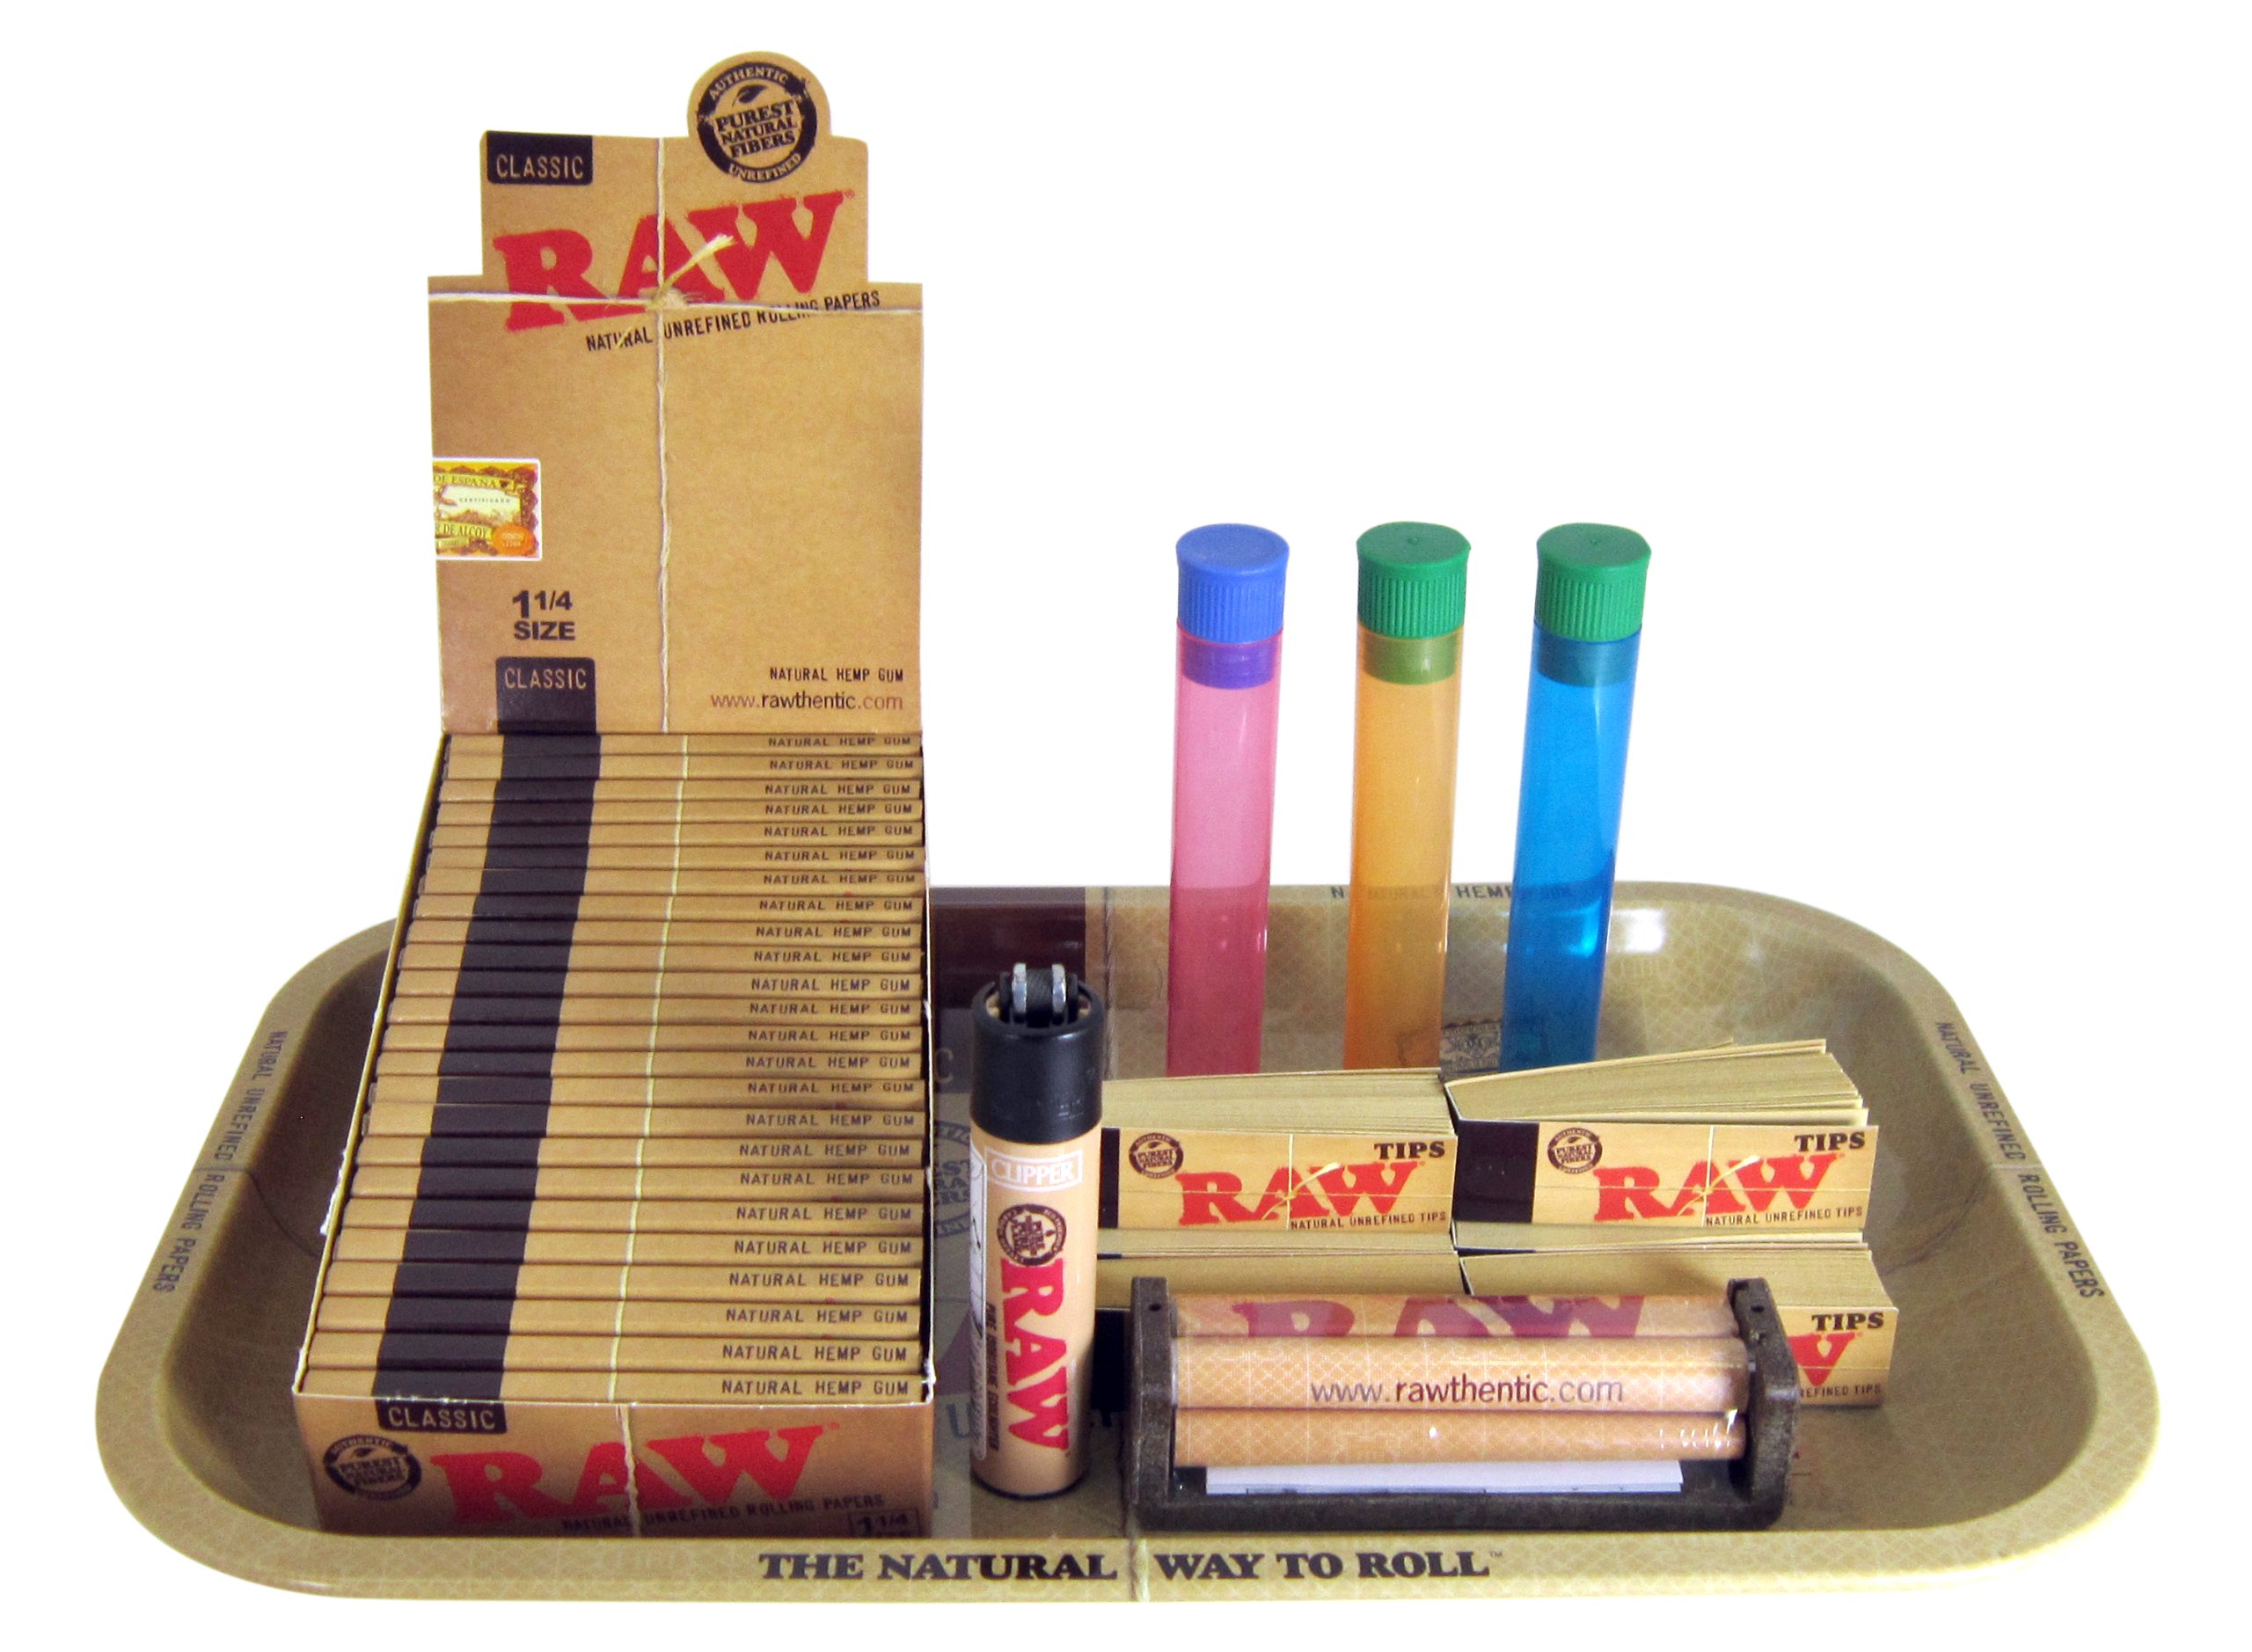 Bundle - 40 Items - RAW Natural 1 1/4 Full Box with Roller, Paper Tips, Lighter, Rolling Tray and KewlTubes